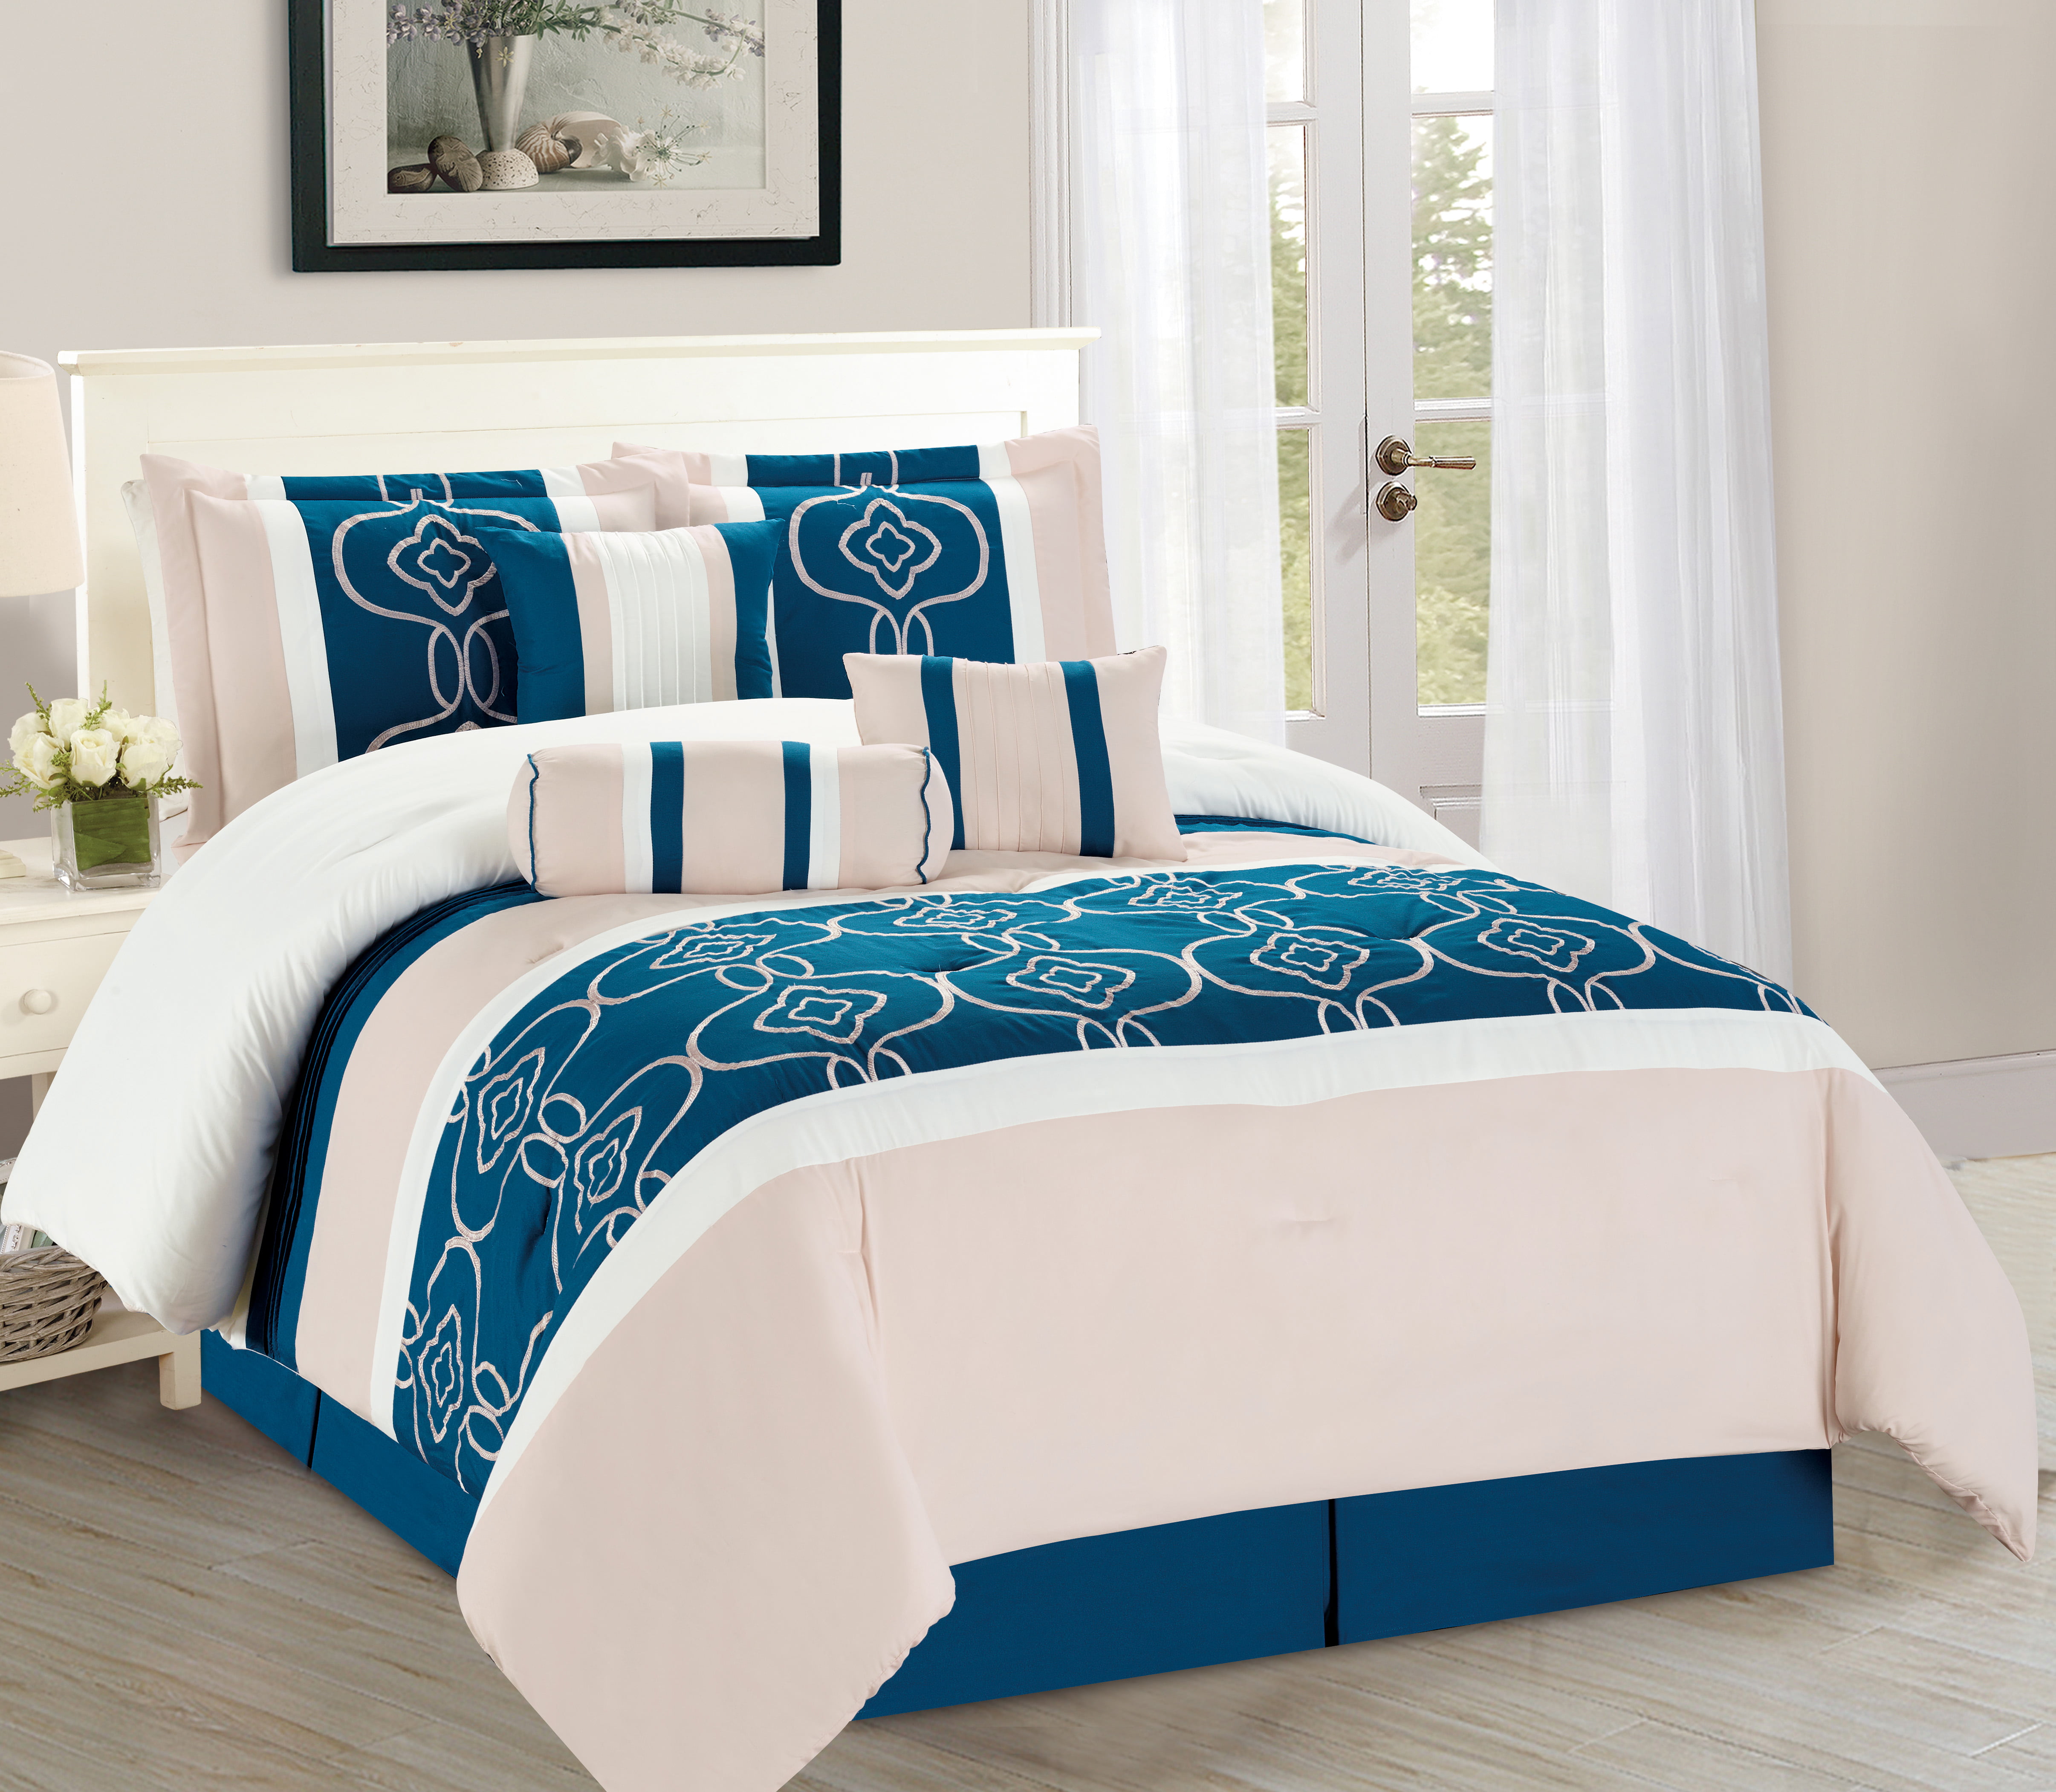 WPM 7 Pieces Complete Bedding Ensemble Turquoise Blue White Beige print Luxury Embroidery